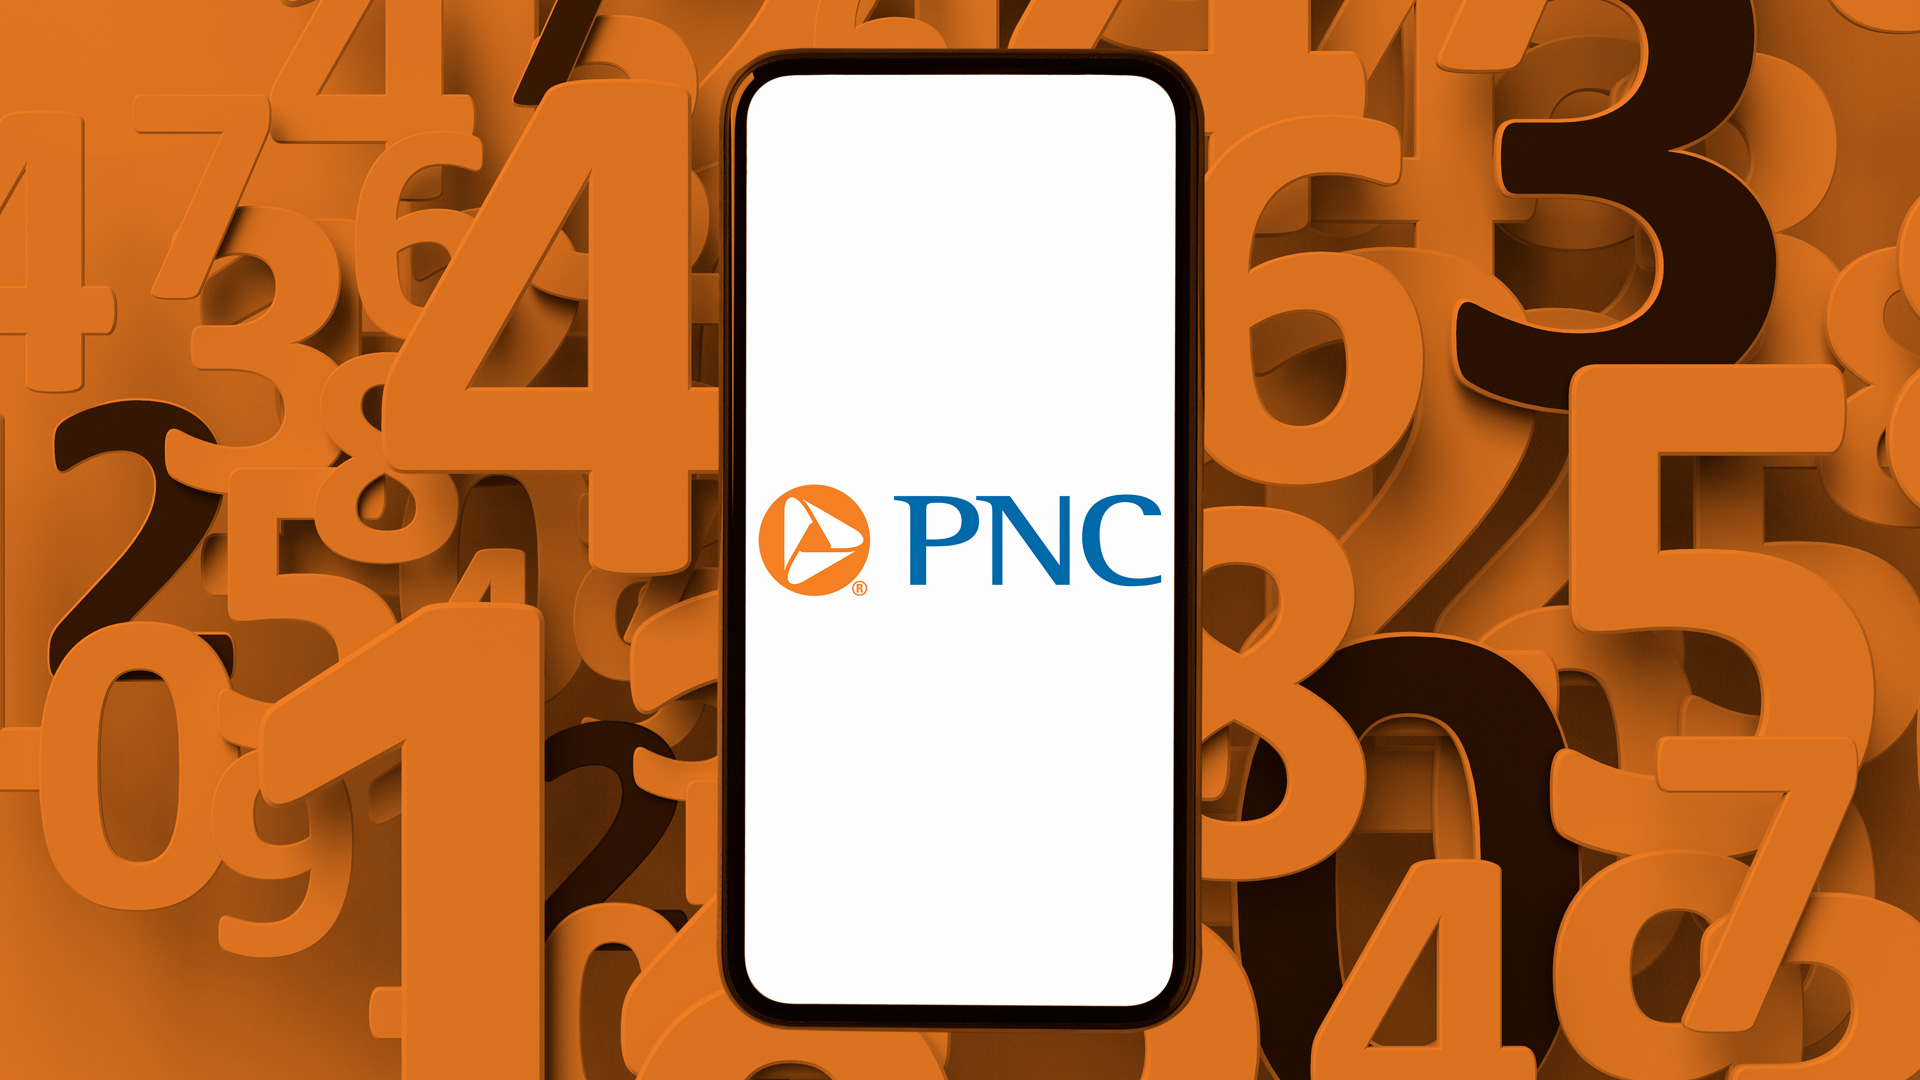 Here's Your PNC Routing Number - GOBankingRates